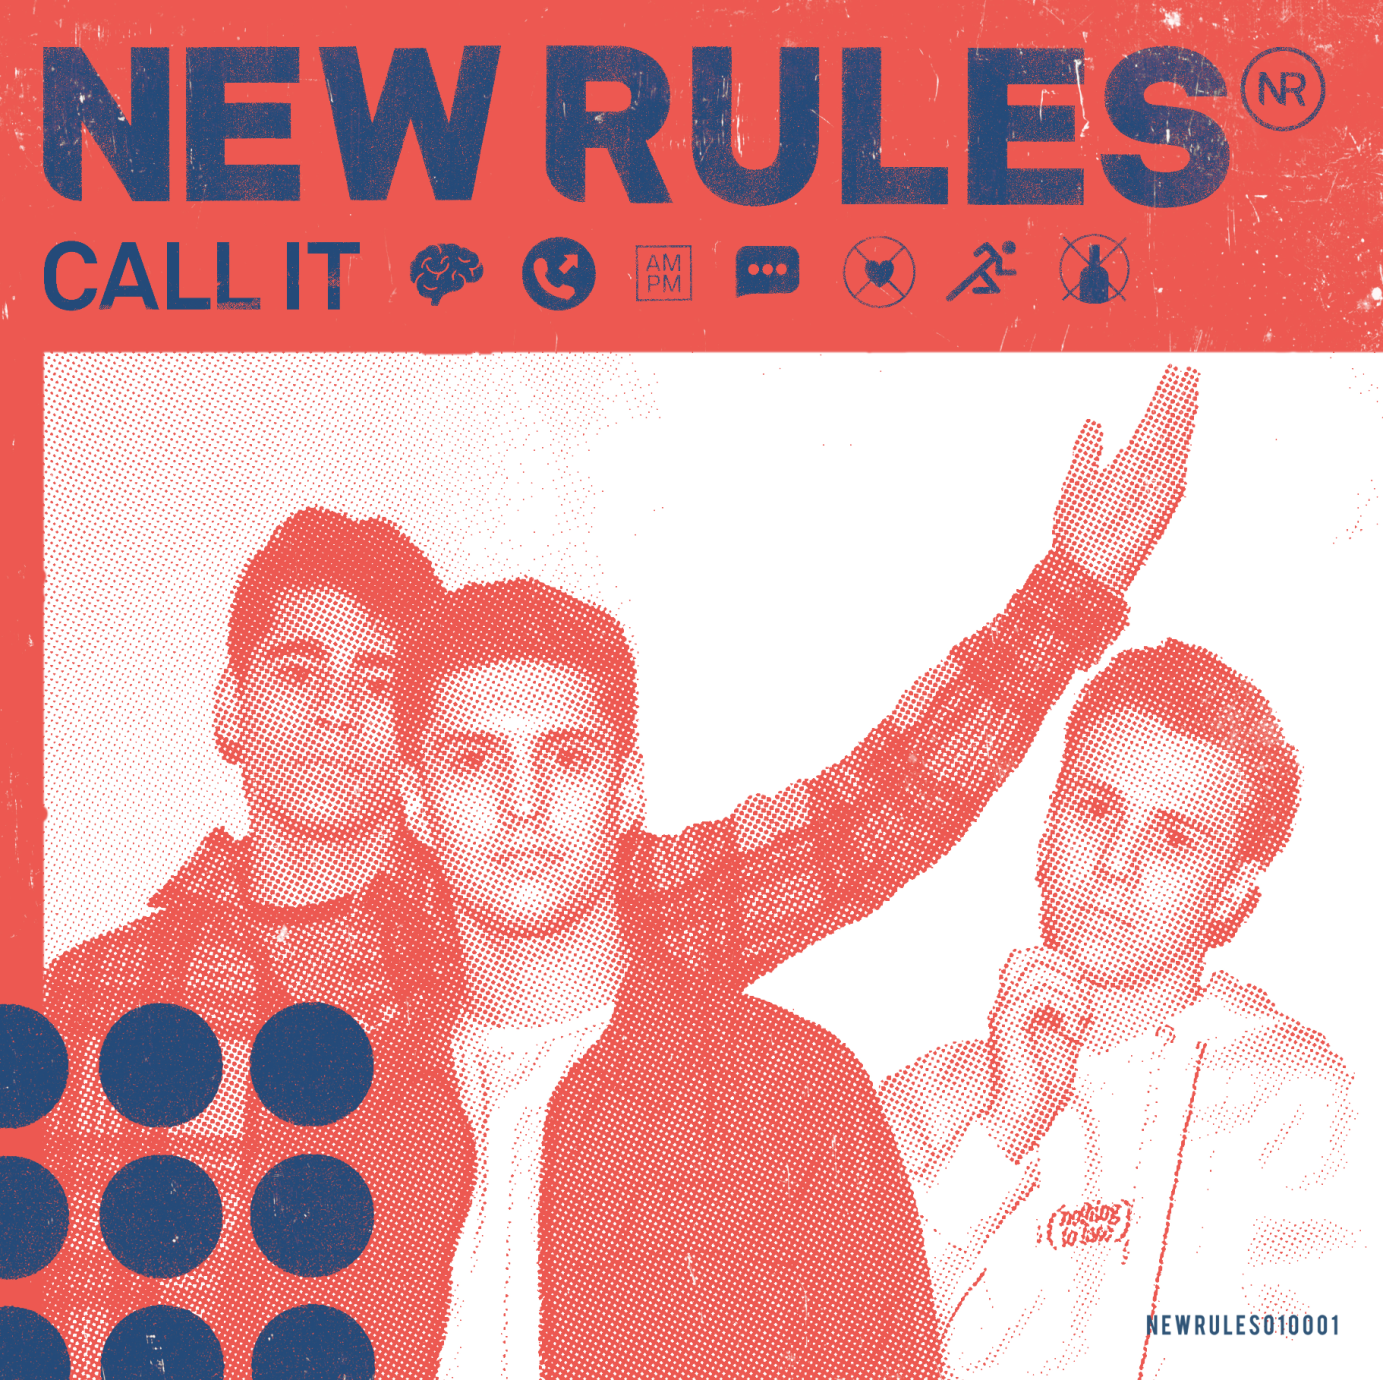 Artwork for New Rules by cottoncreative